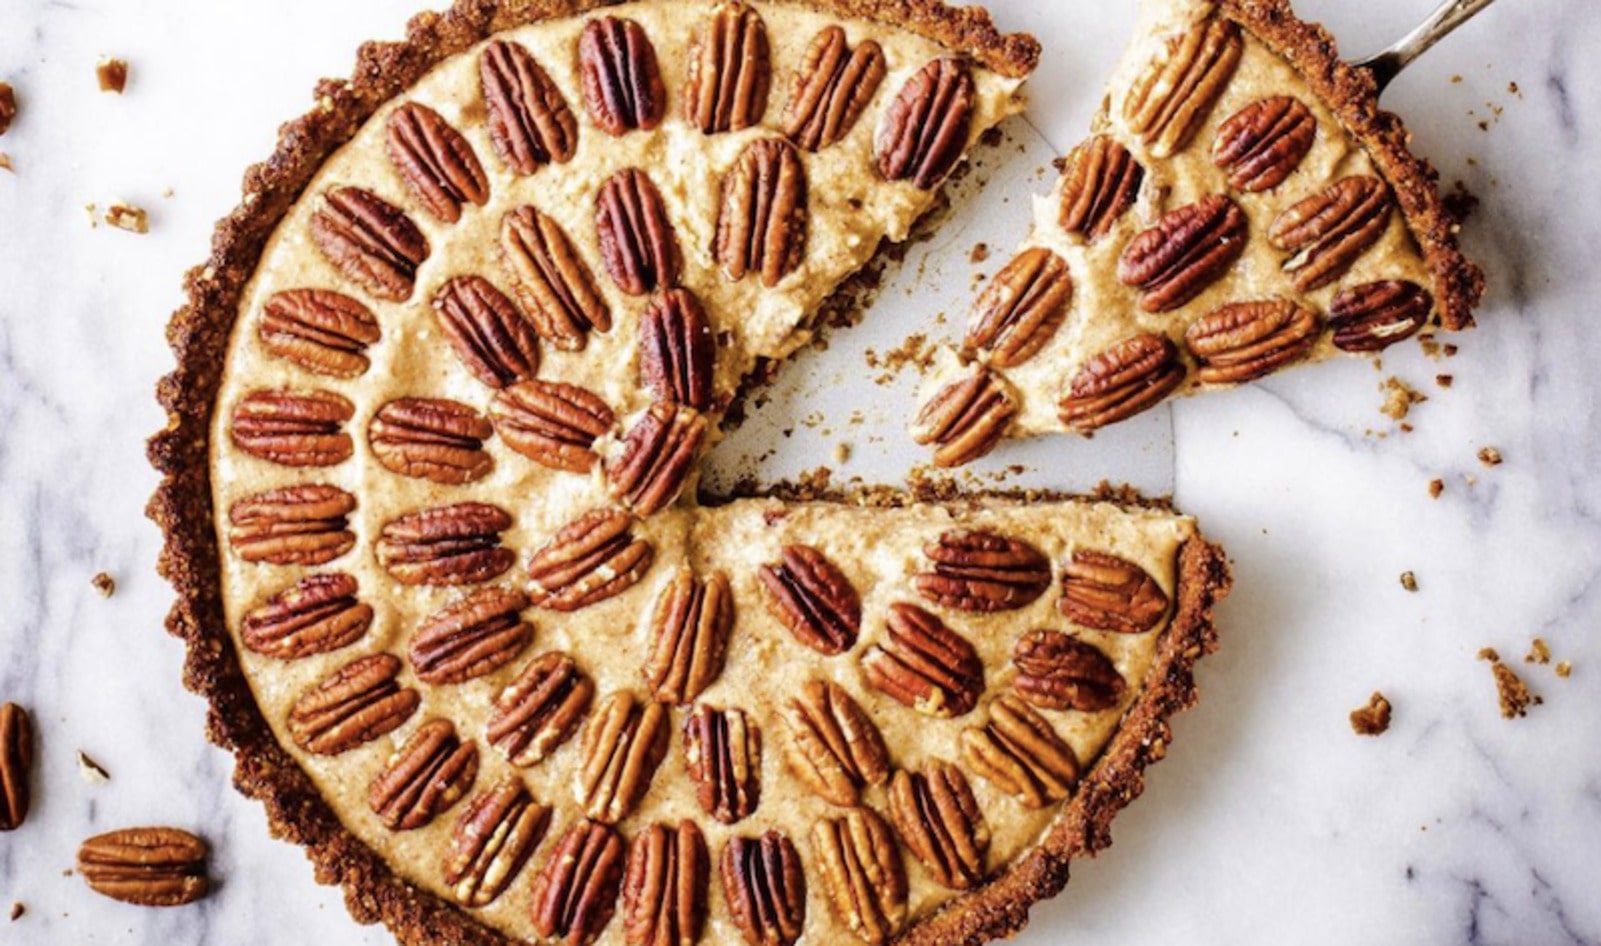 The VegNews Guide to Making Any Pie Vegan